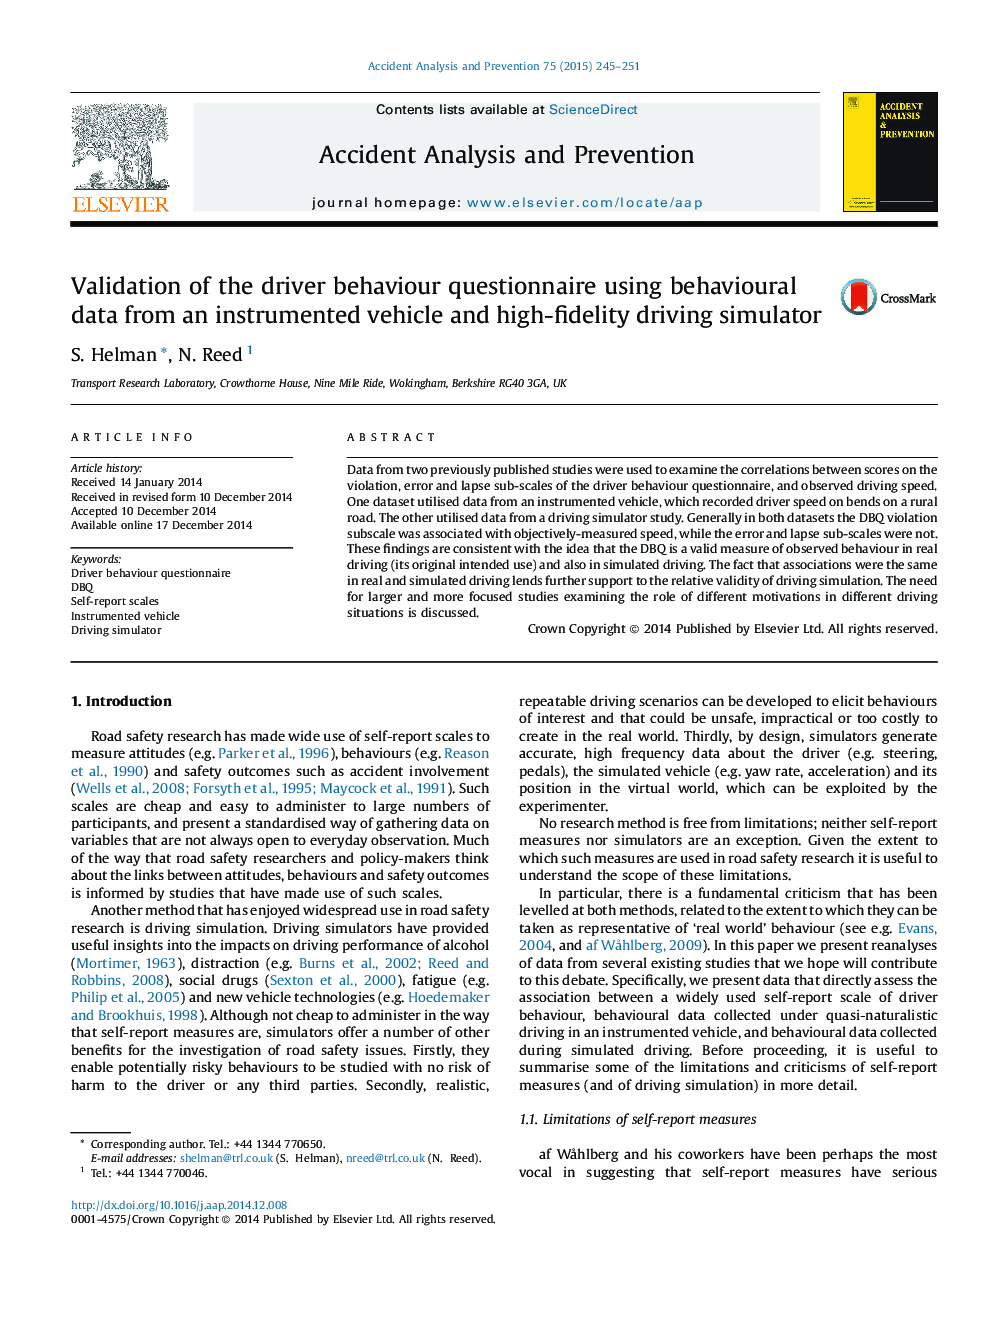 Validation of the driver behaviour questionnaire using behavioural data from an instrumented vehicle and high-fidelity driving simulator